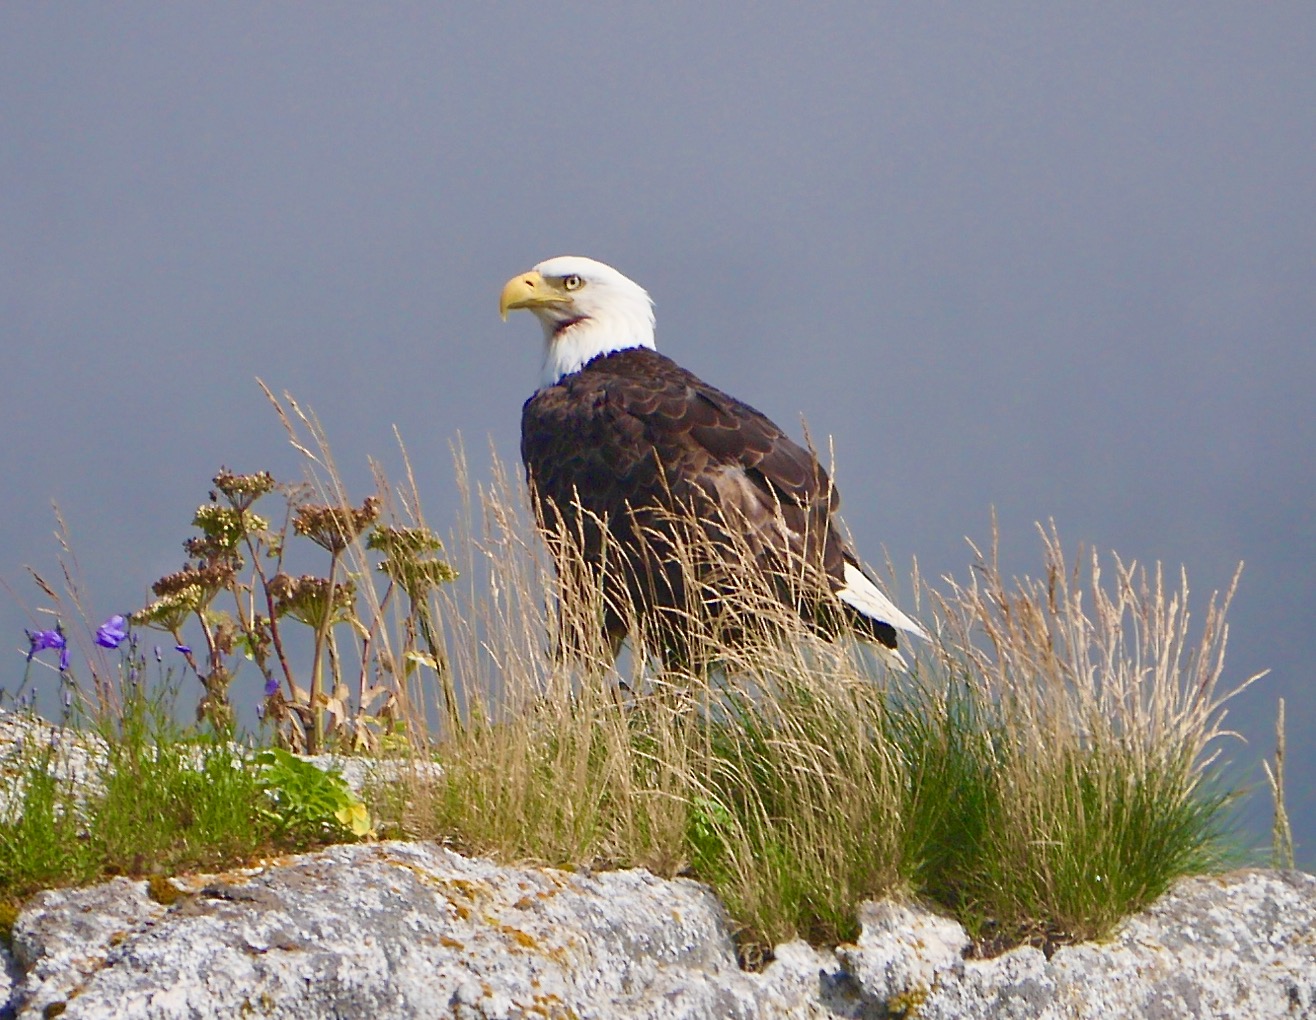 Eagle on the rock.